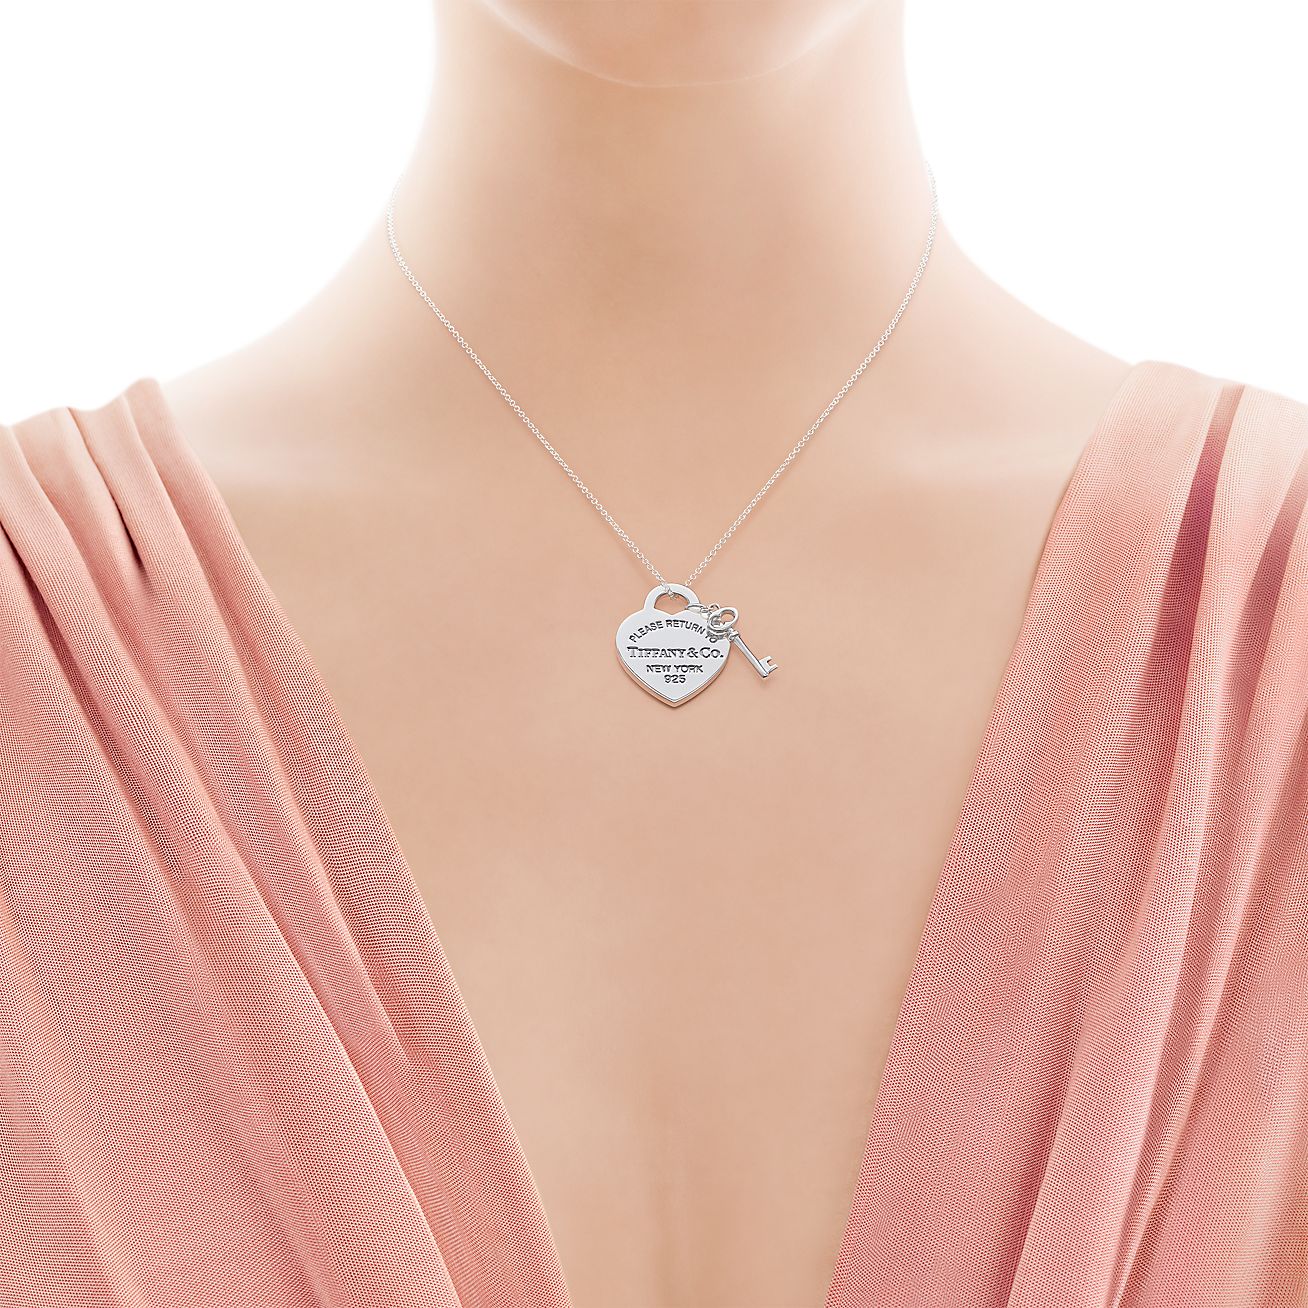 Return to Tiffany™ medium heart tag with key pendant in sterling silver.